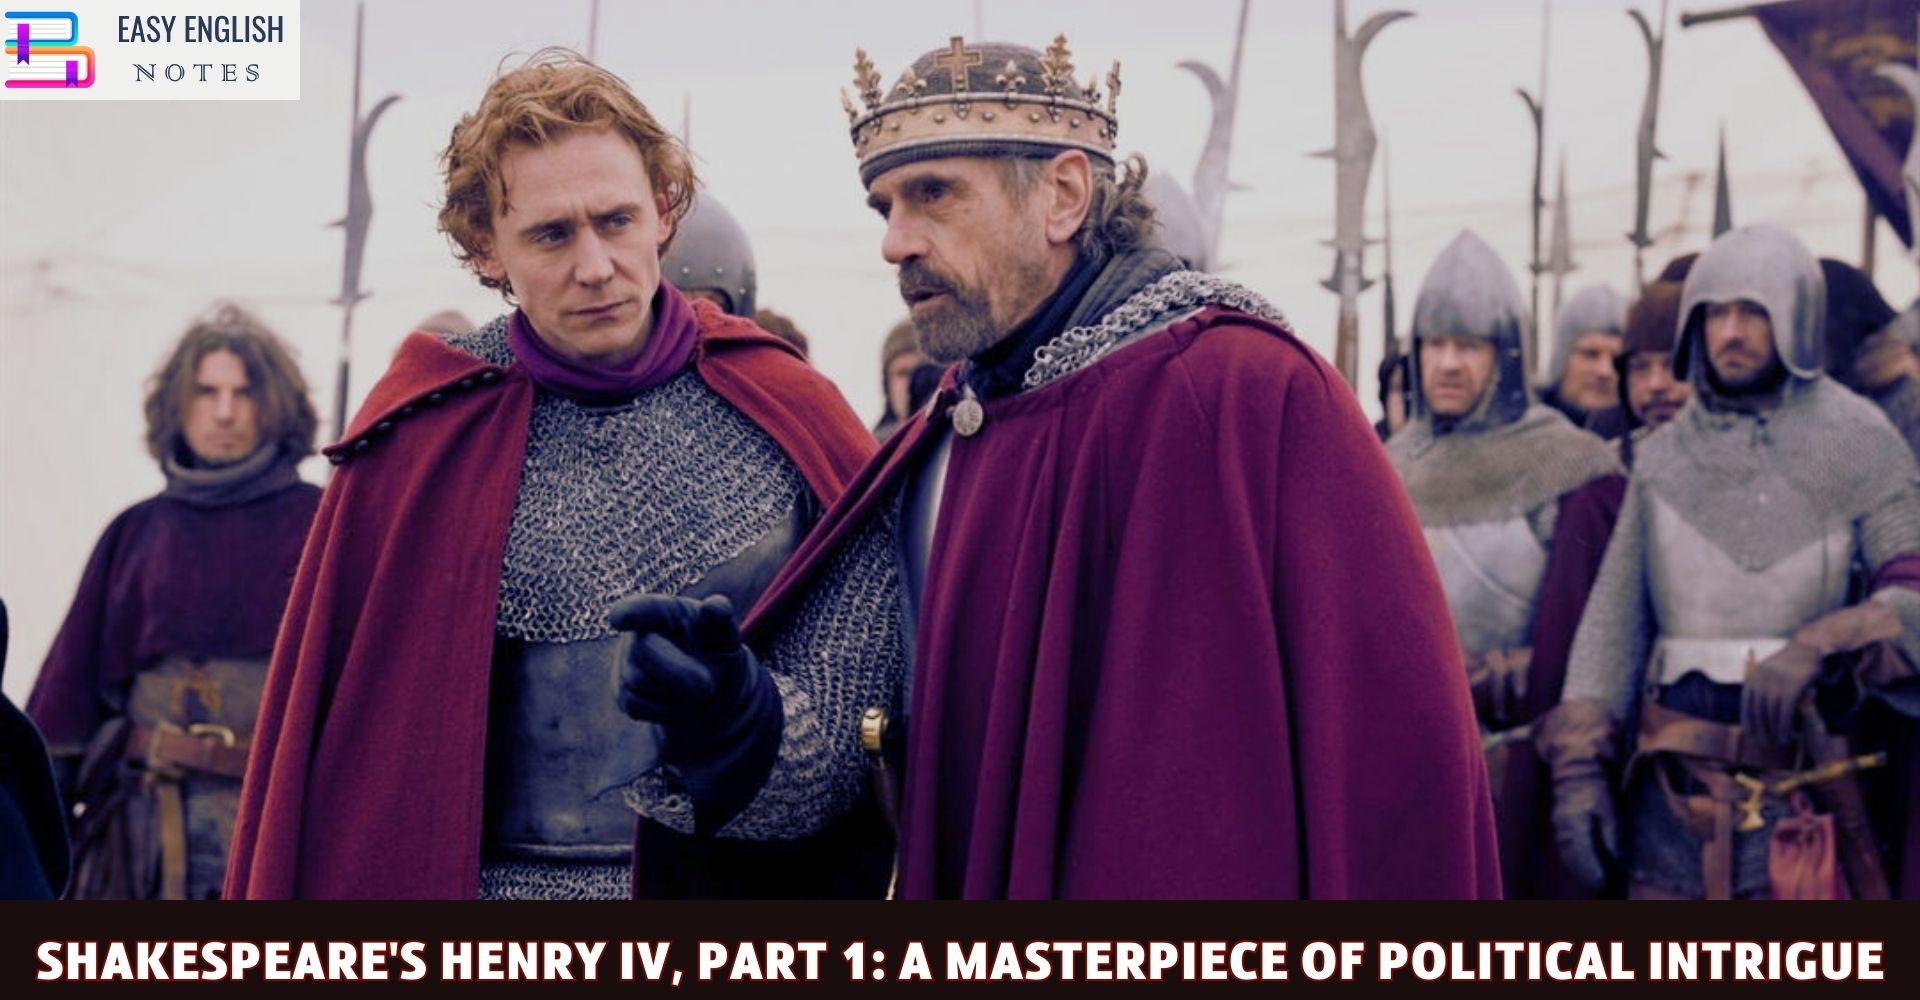 Shakespeare's Henry IV, Part 1: A Masterpiece of Political Intrigue